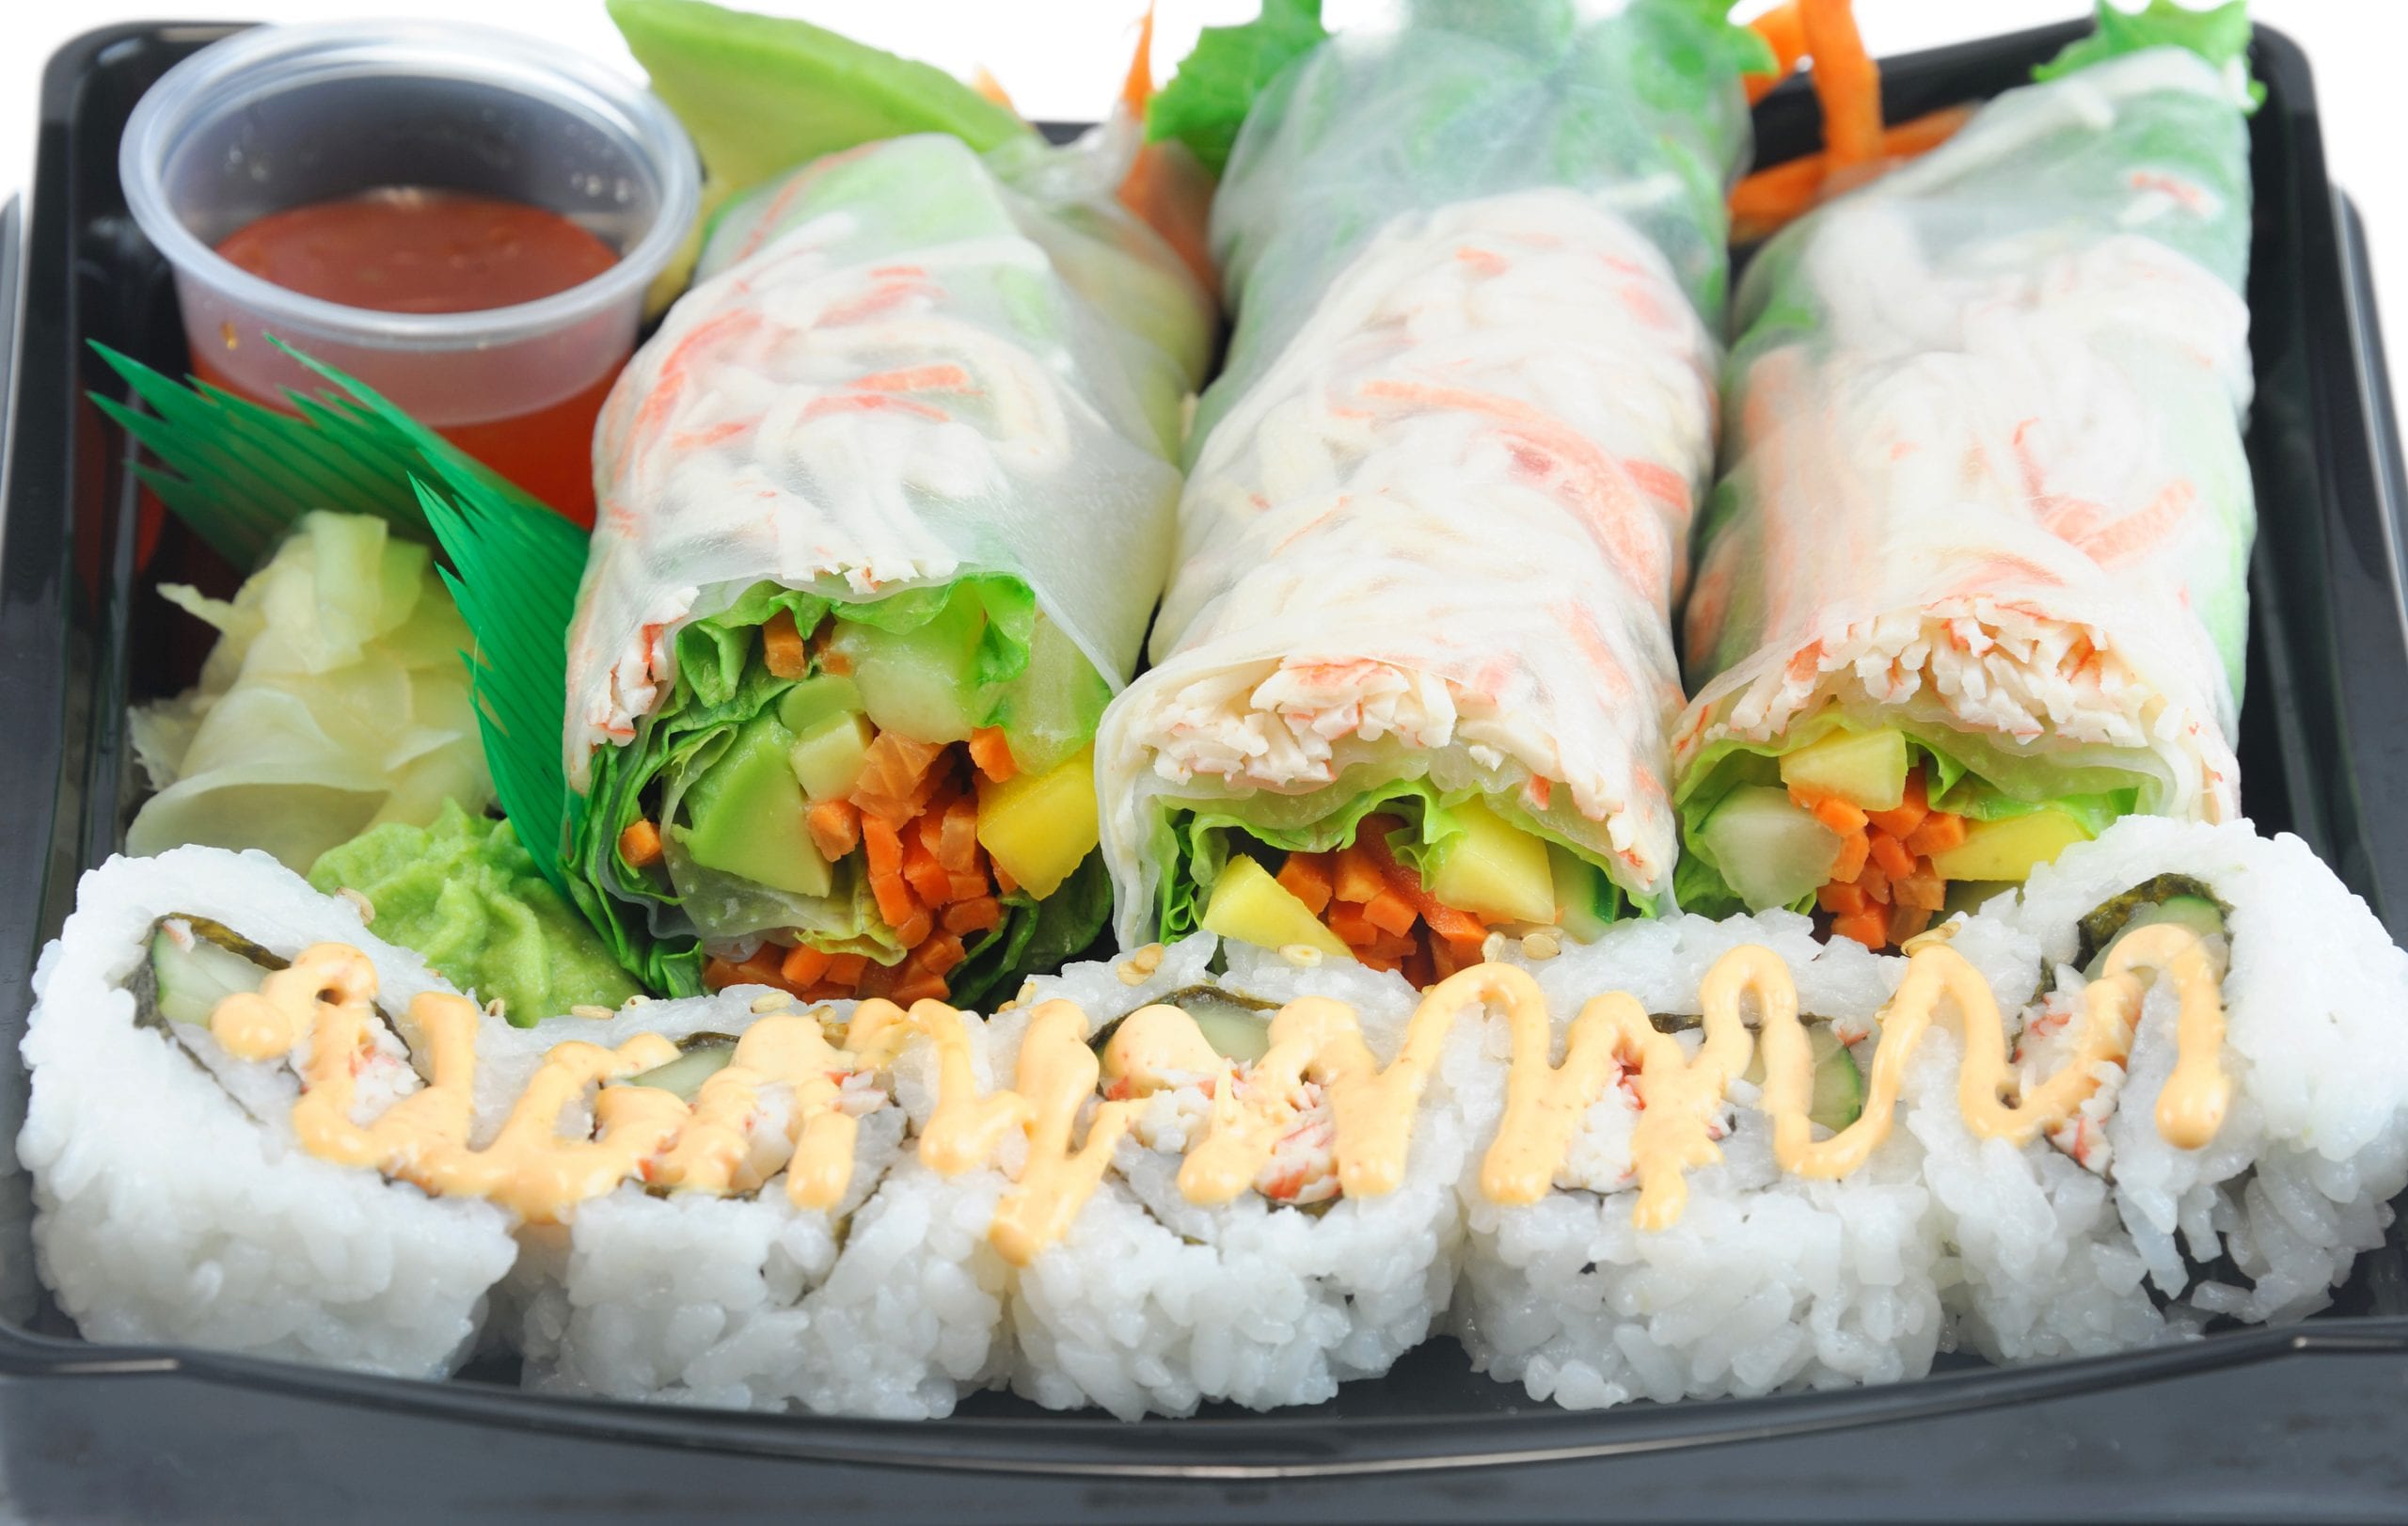 Ready-to-Eat Sushi Salads and Spring Rolls Recalled for Listeria Contamination